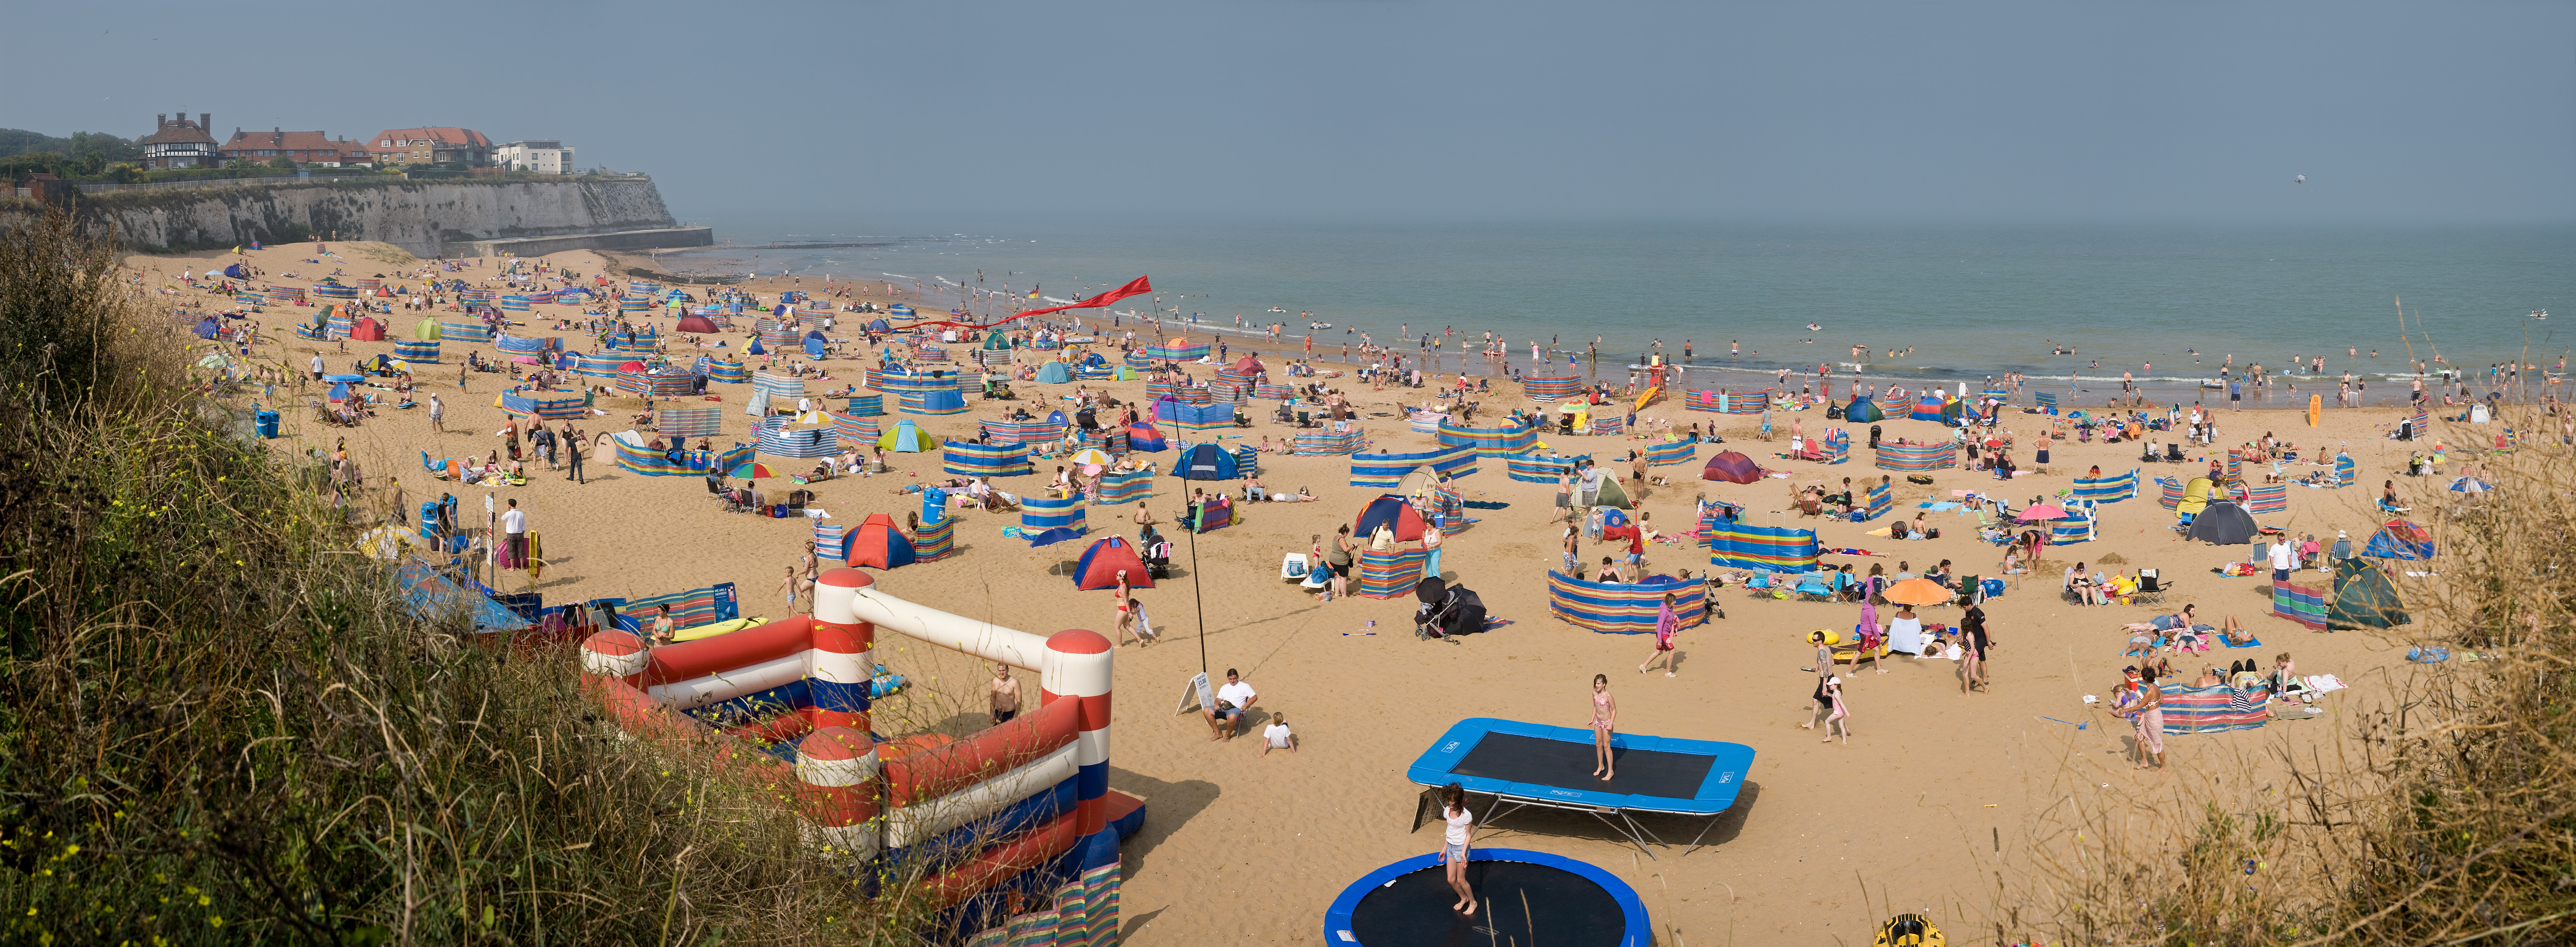 English: A sunny August day at the beach at Jo...